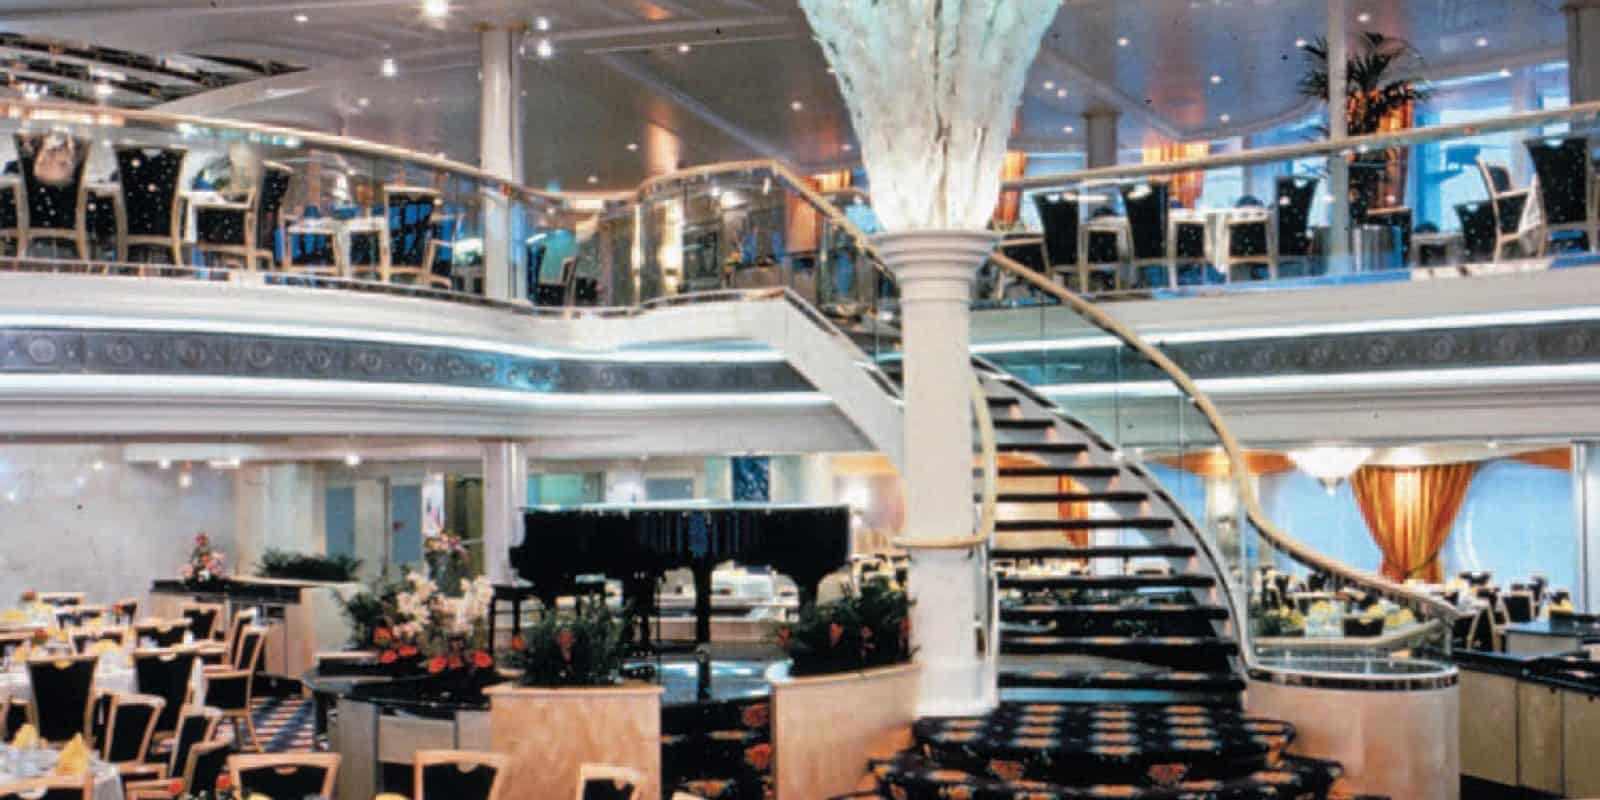 Vision of the Seas Dining